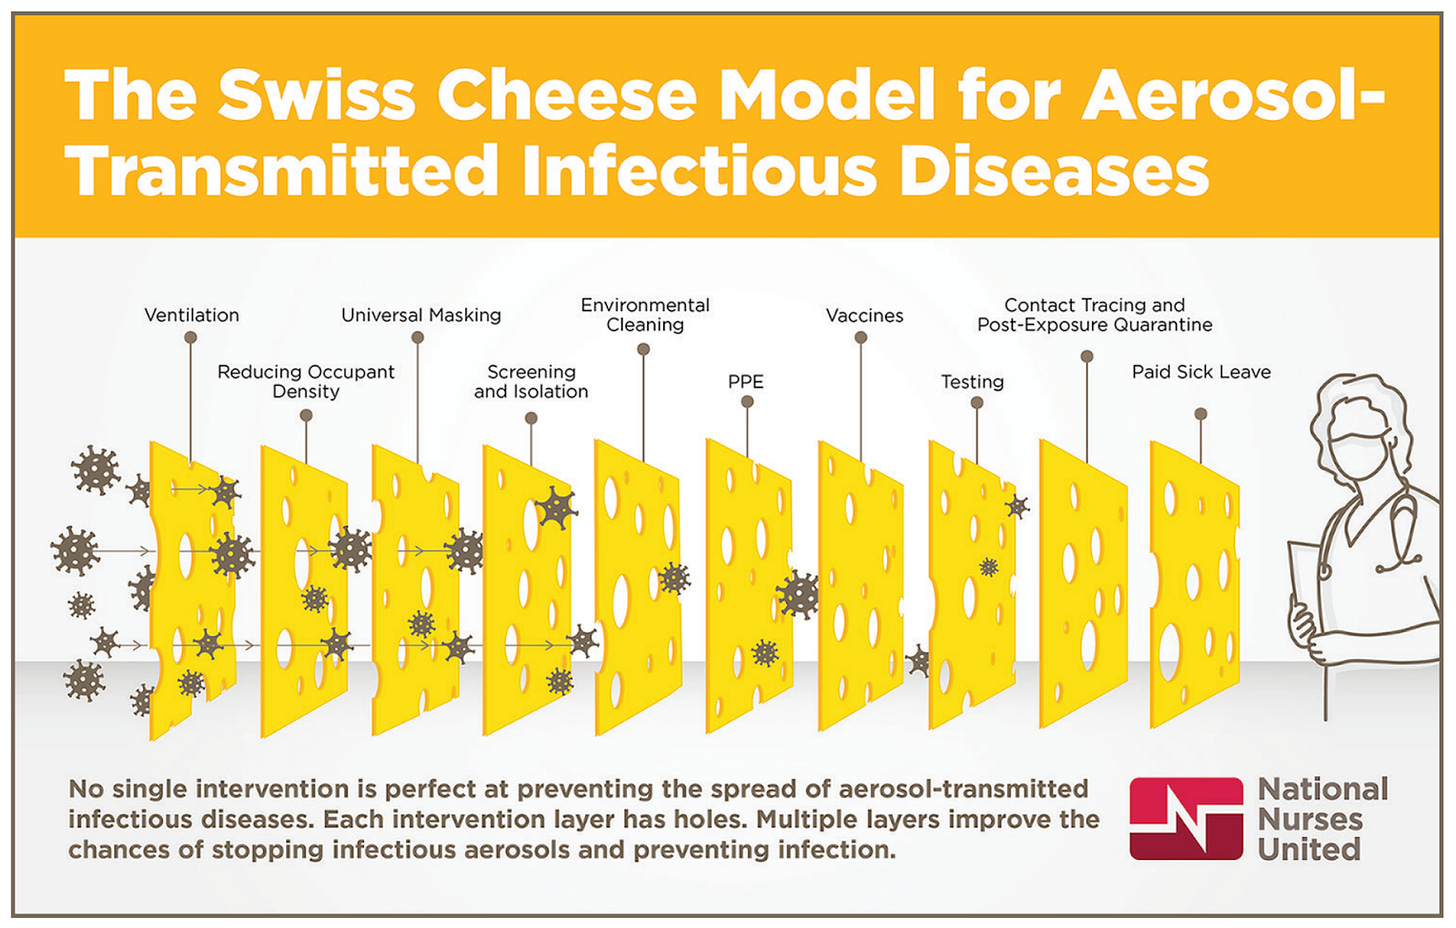 The Swiss Cheese Model for Aerosol- Transmitted Infectious Diseases Ventilation Universal Masking Reducing Occupant Density Environmental Cleaning Screening and Isolation Vaccines PPE Contact Tracing and Post-Exposure Quarantine Paid Sick Leave Testing No single intervention is perfect at preventing the spread of aerosol-transmitted infectious diseases. Each intervention layer has holes. Multiple layers improve the chances of stopping infectious aerosols and preventing infection. National Nurses United